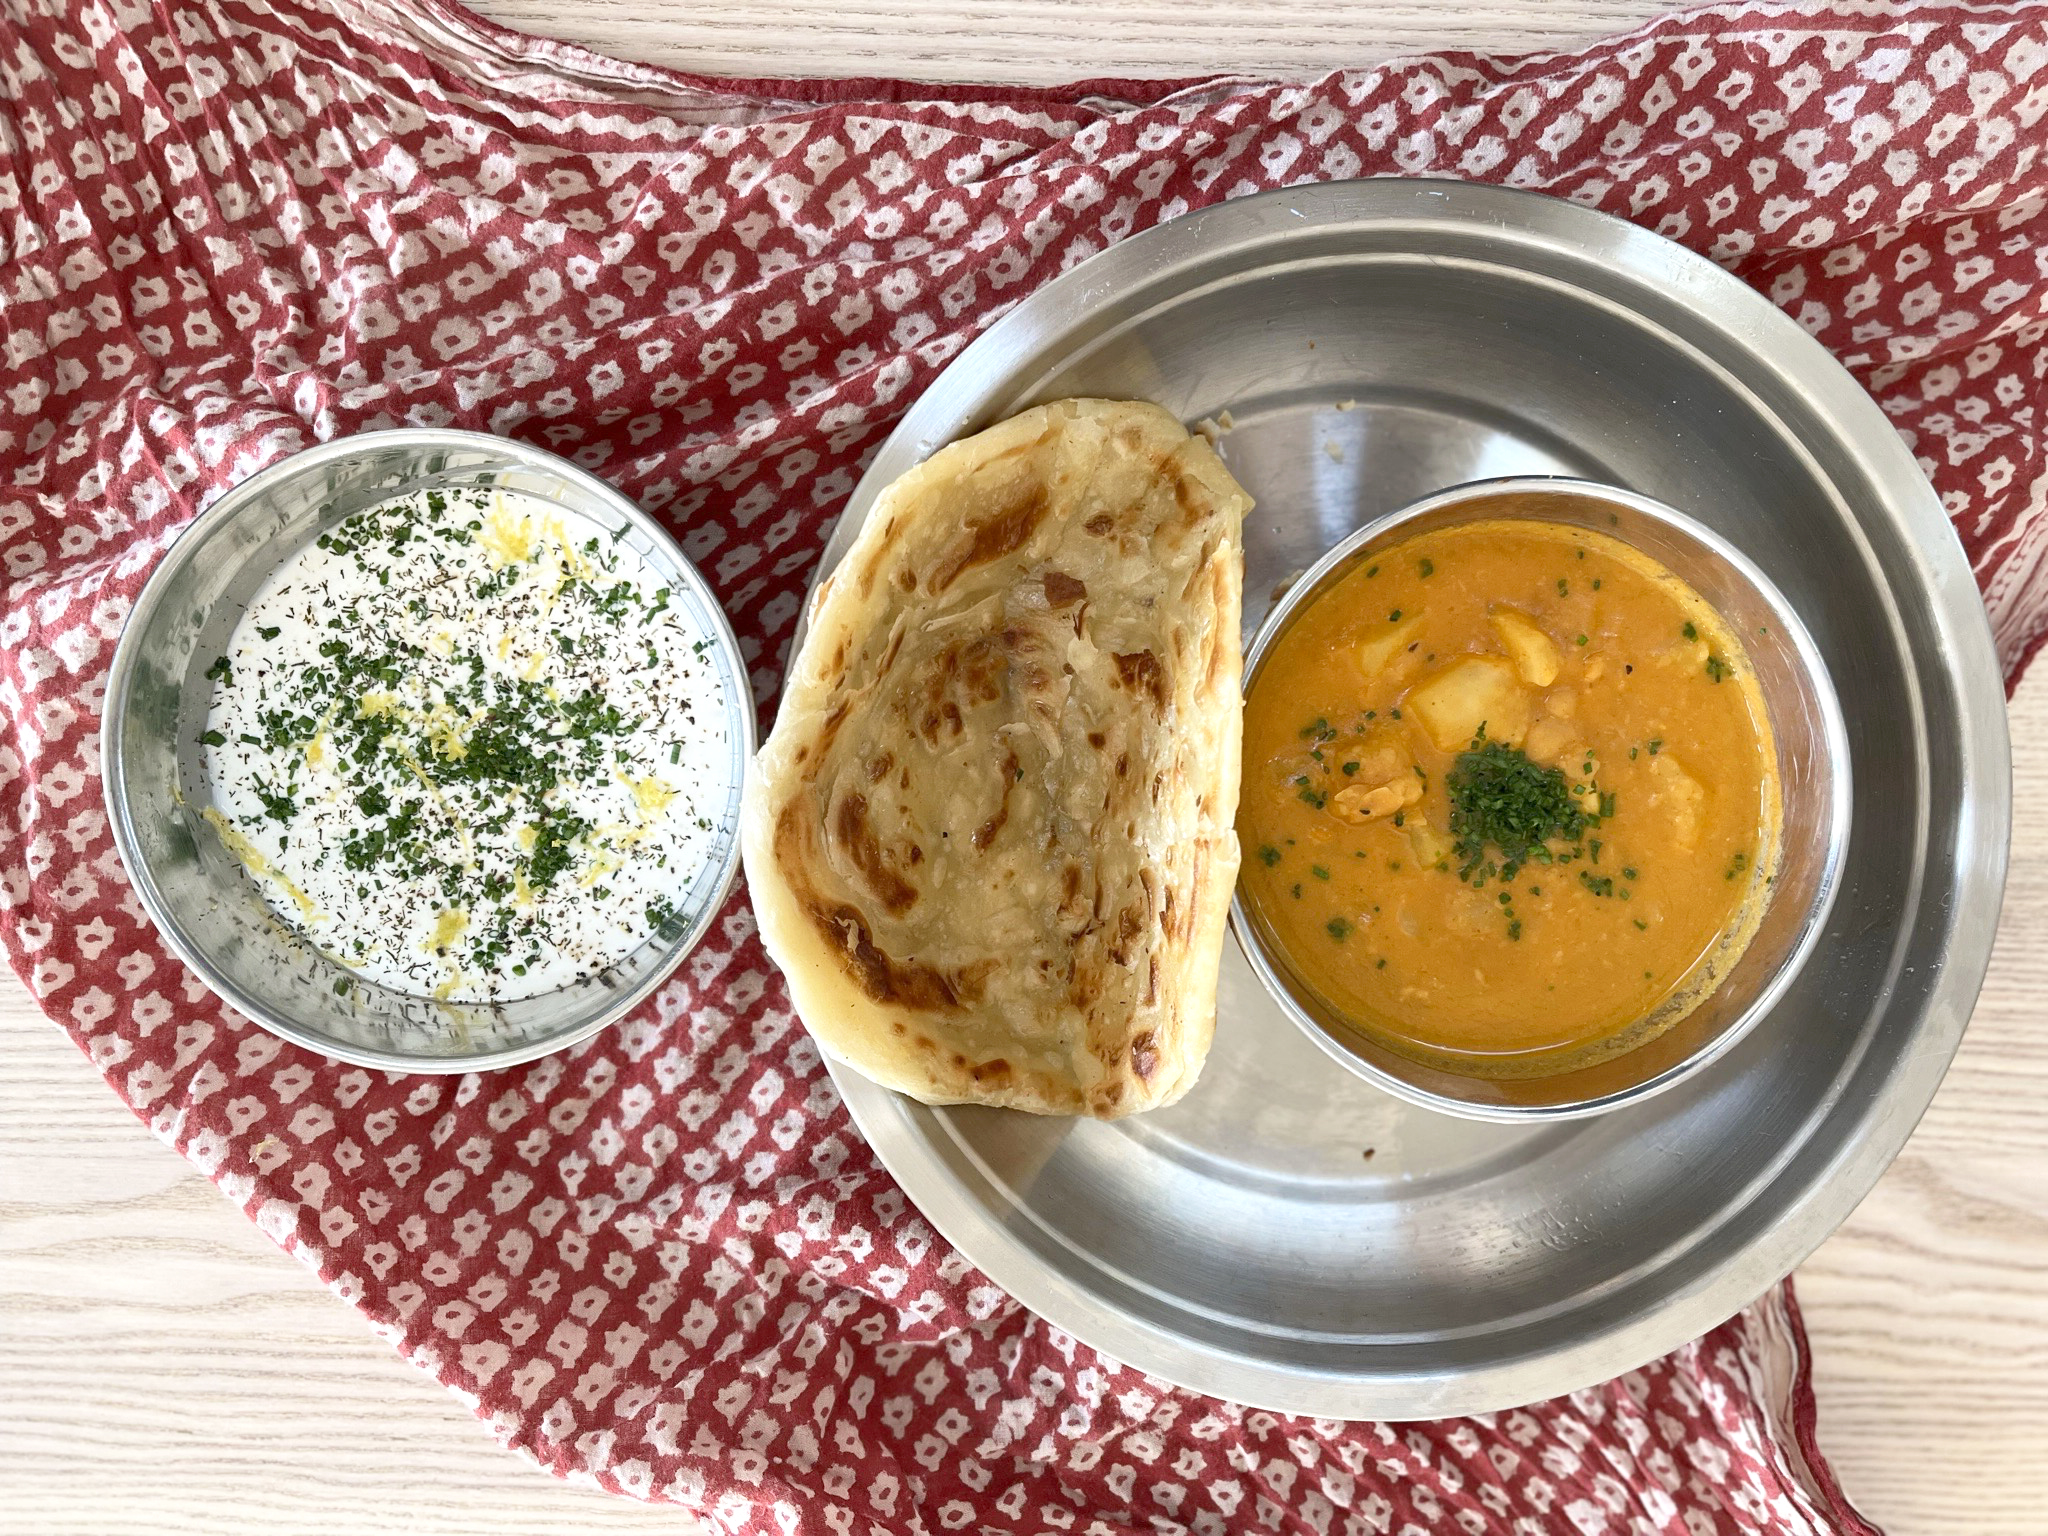 A tin bowl of a flatbread with another bowl of orange sauce next to a bowl of white sauce with green herbs.